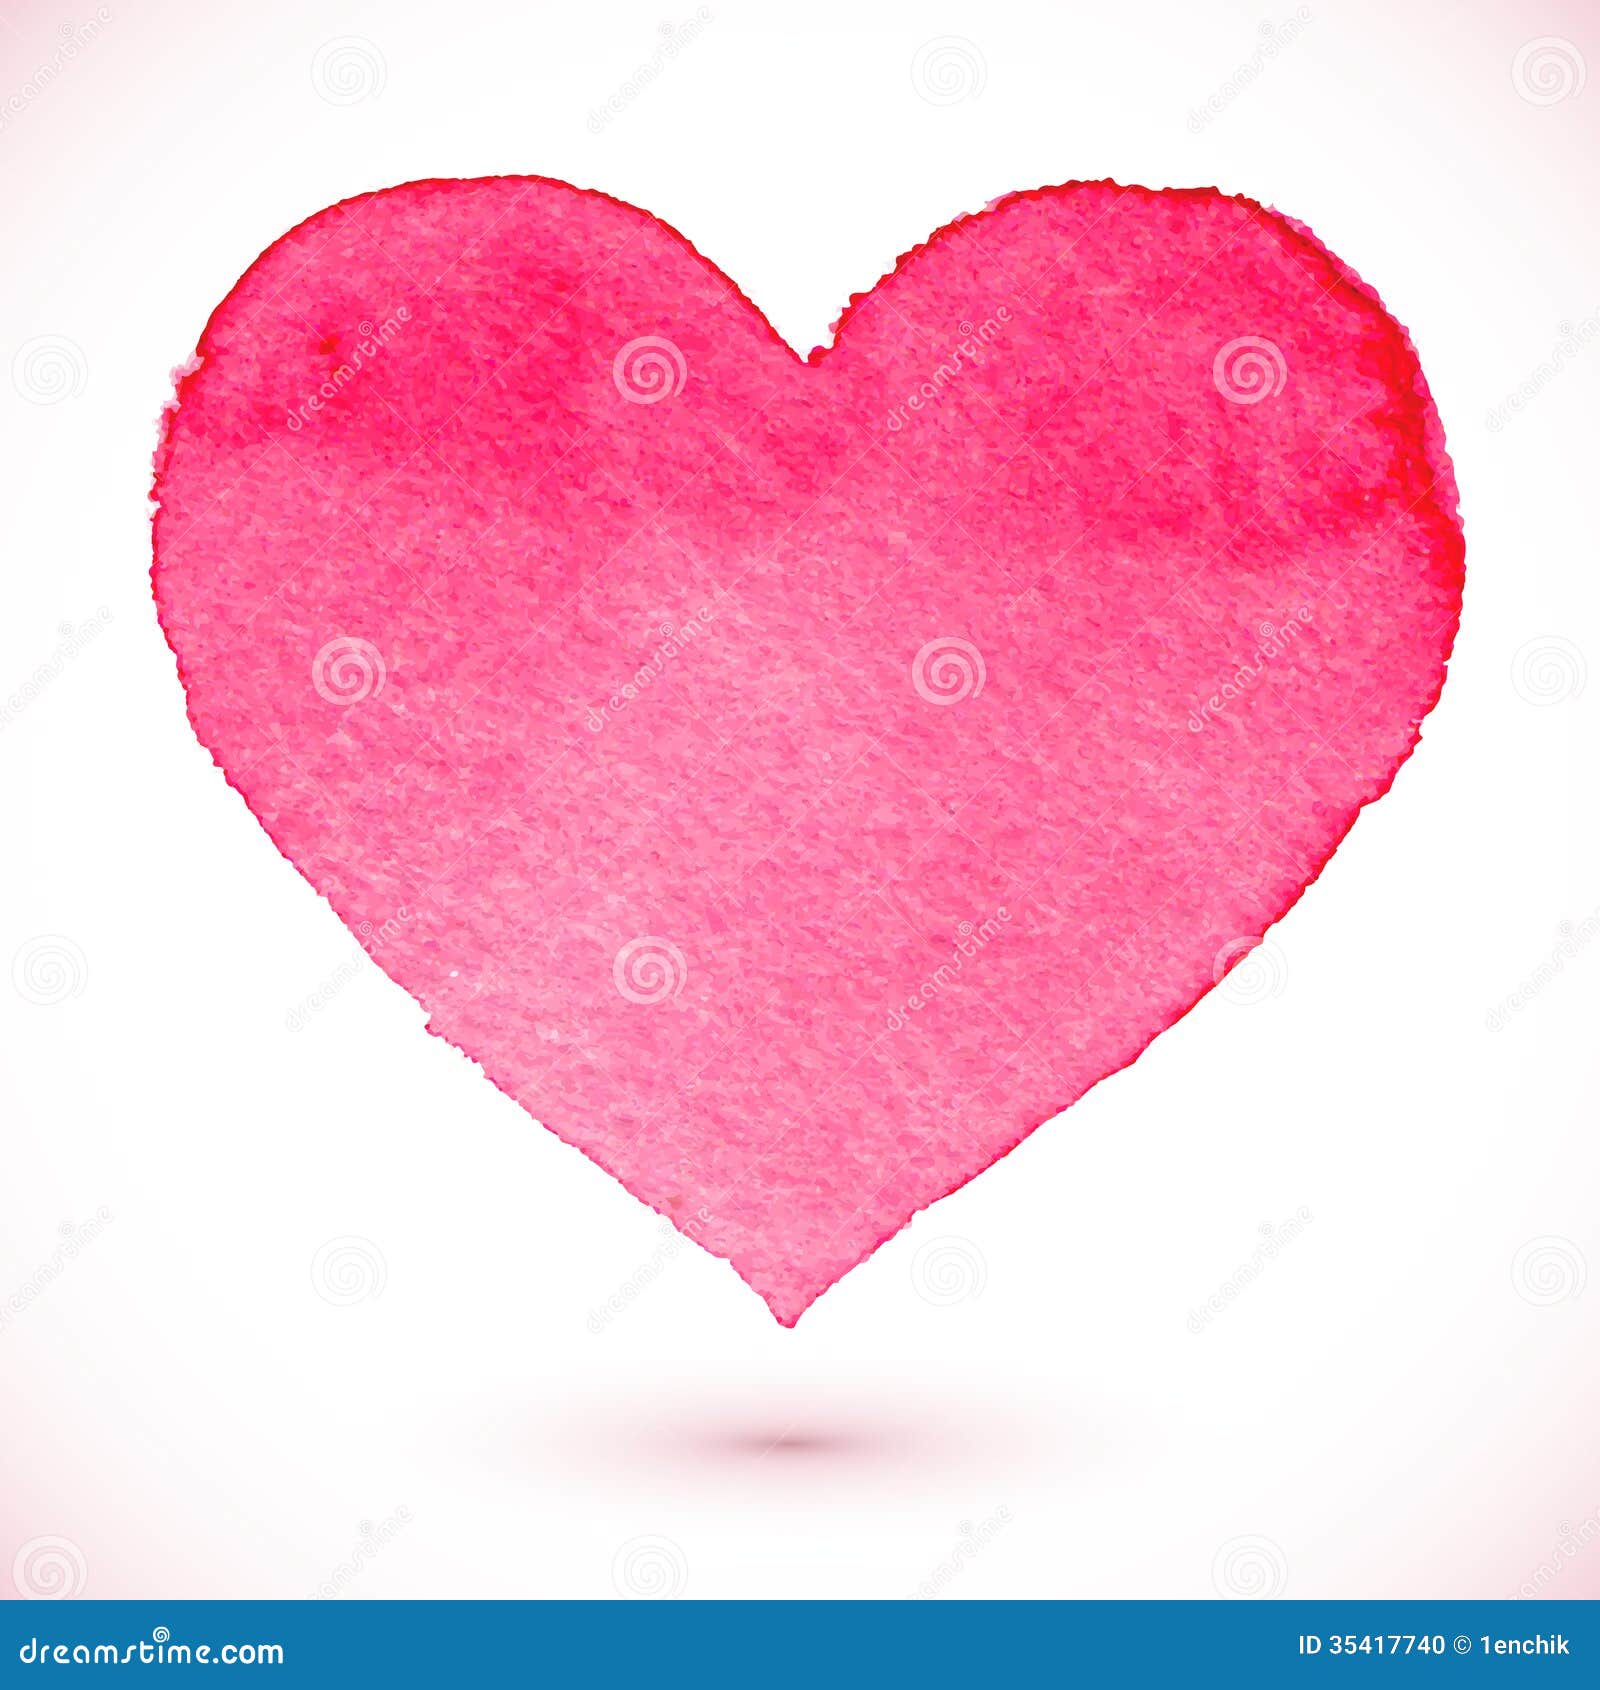 Download Watercolor Painted Pink Heart Stock Vector - Illustration ...